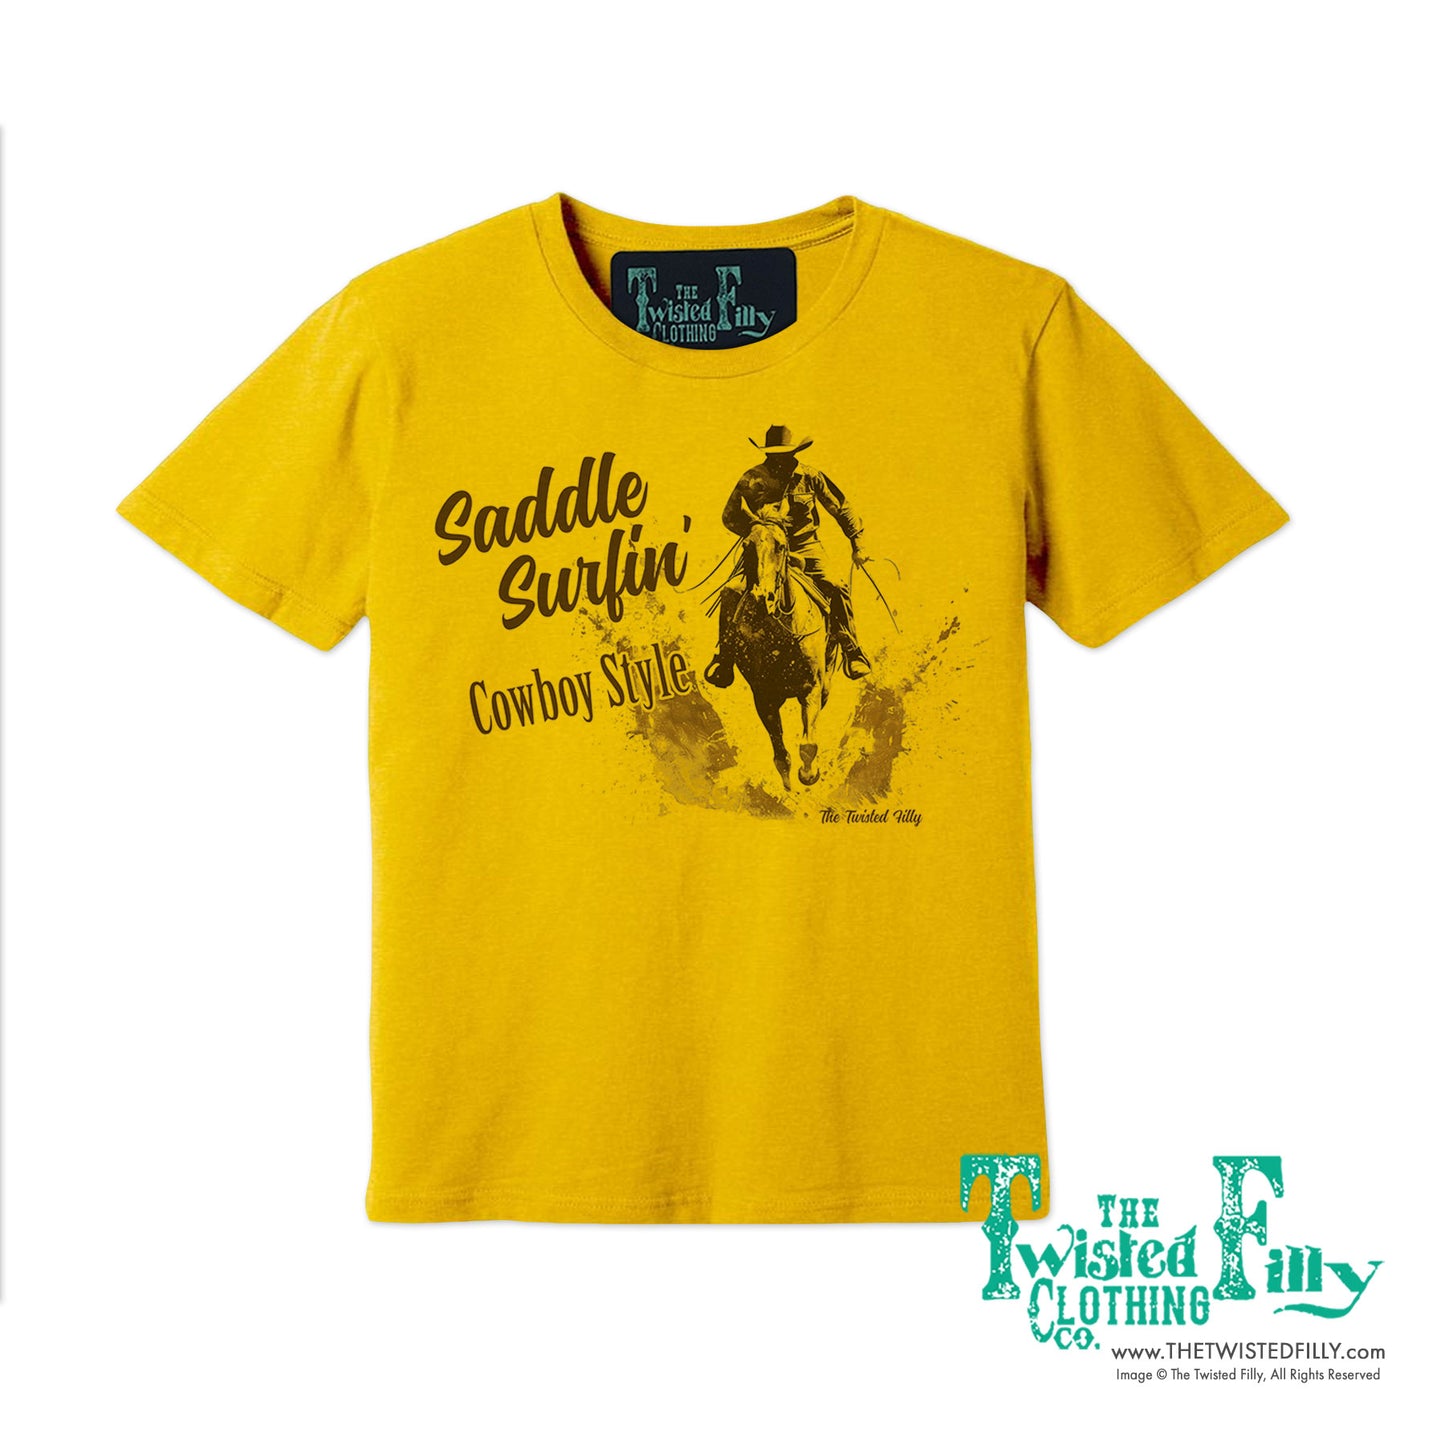 Saddle Surfin' Cowboy Style - S/S Mens Crew Neck Unisex Tee - Assorted Colors